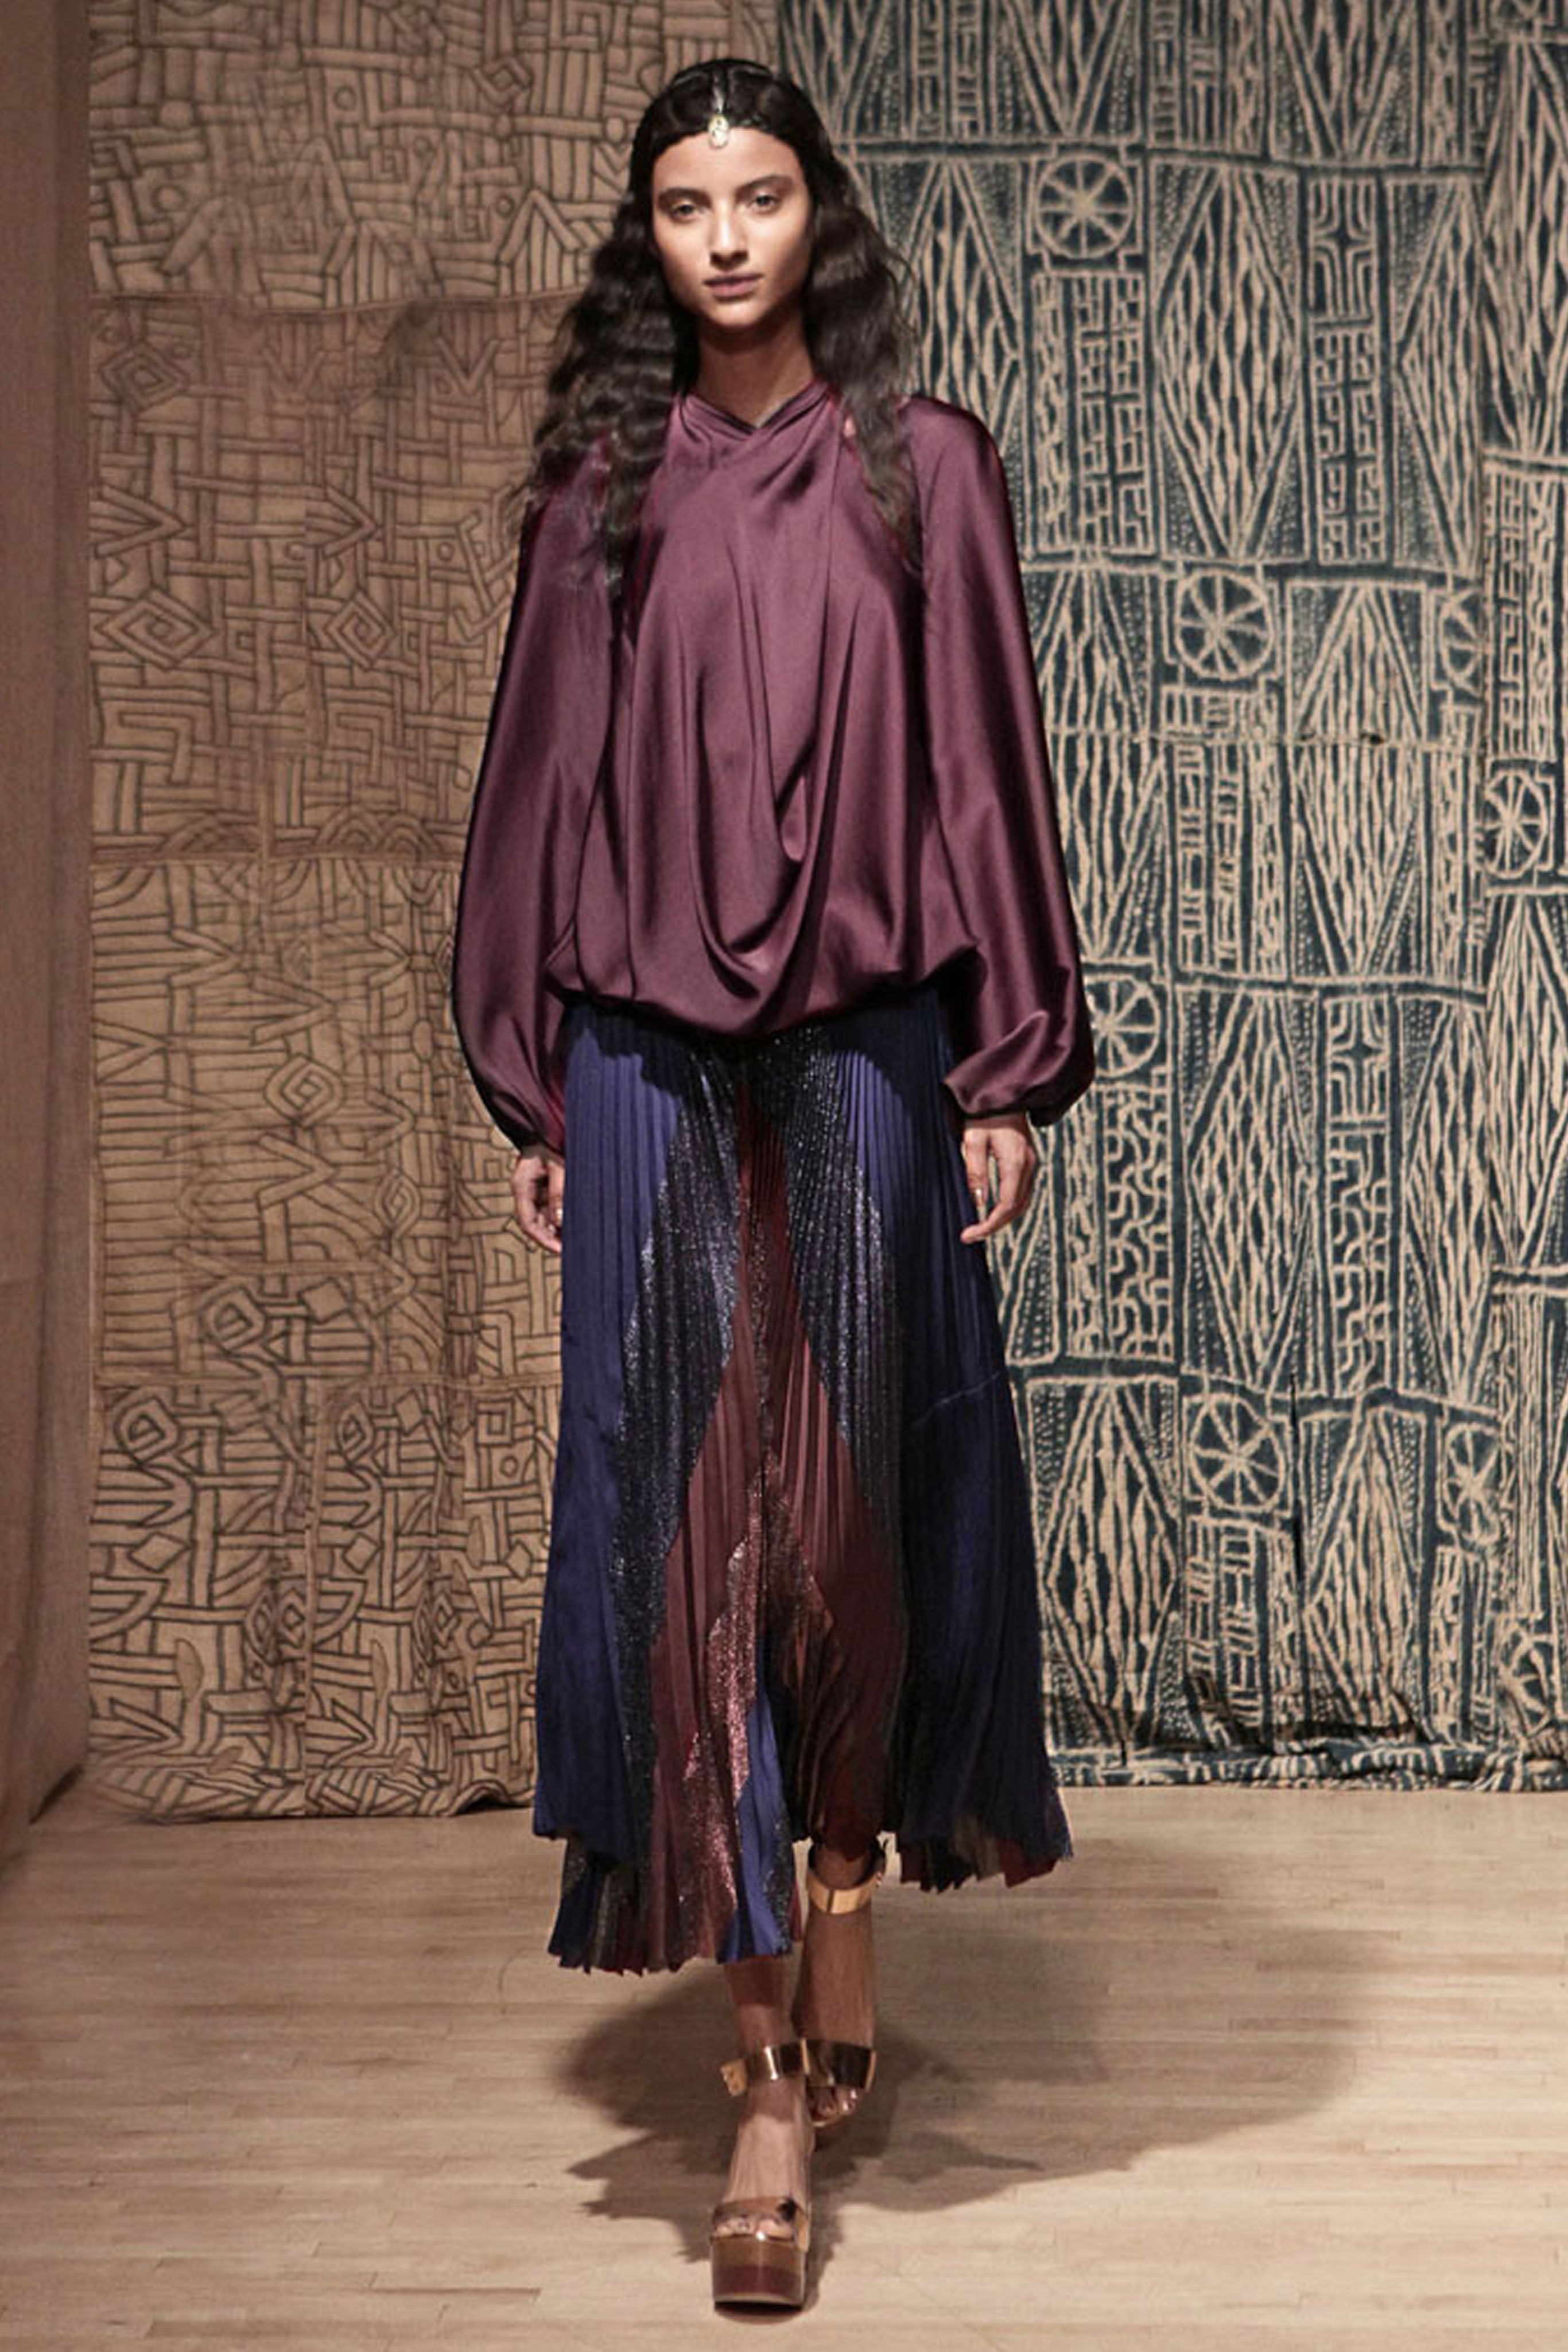 Model wearing a plum colored top with a sunburst accordion skirt that is different fabrics 